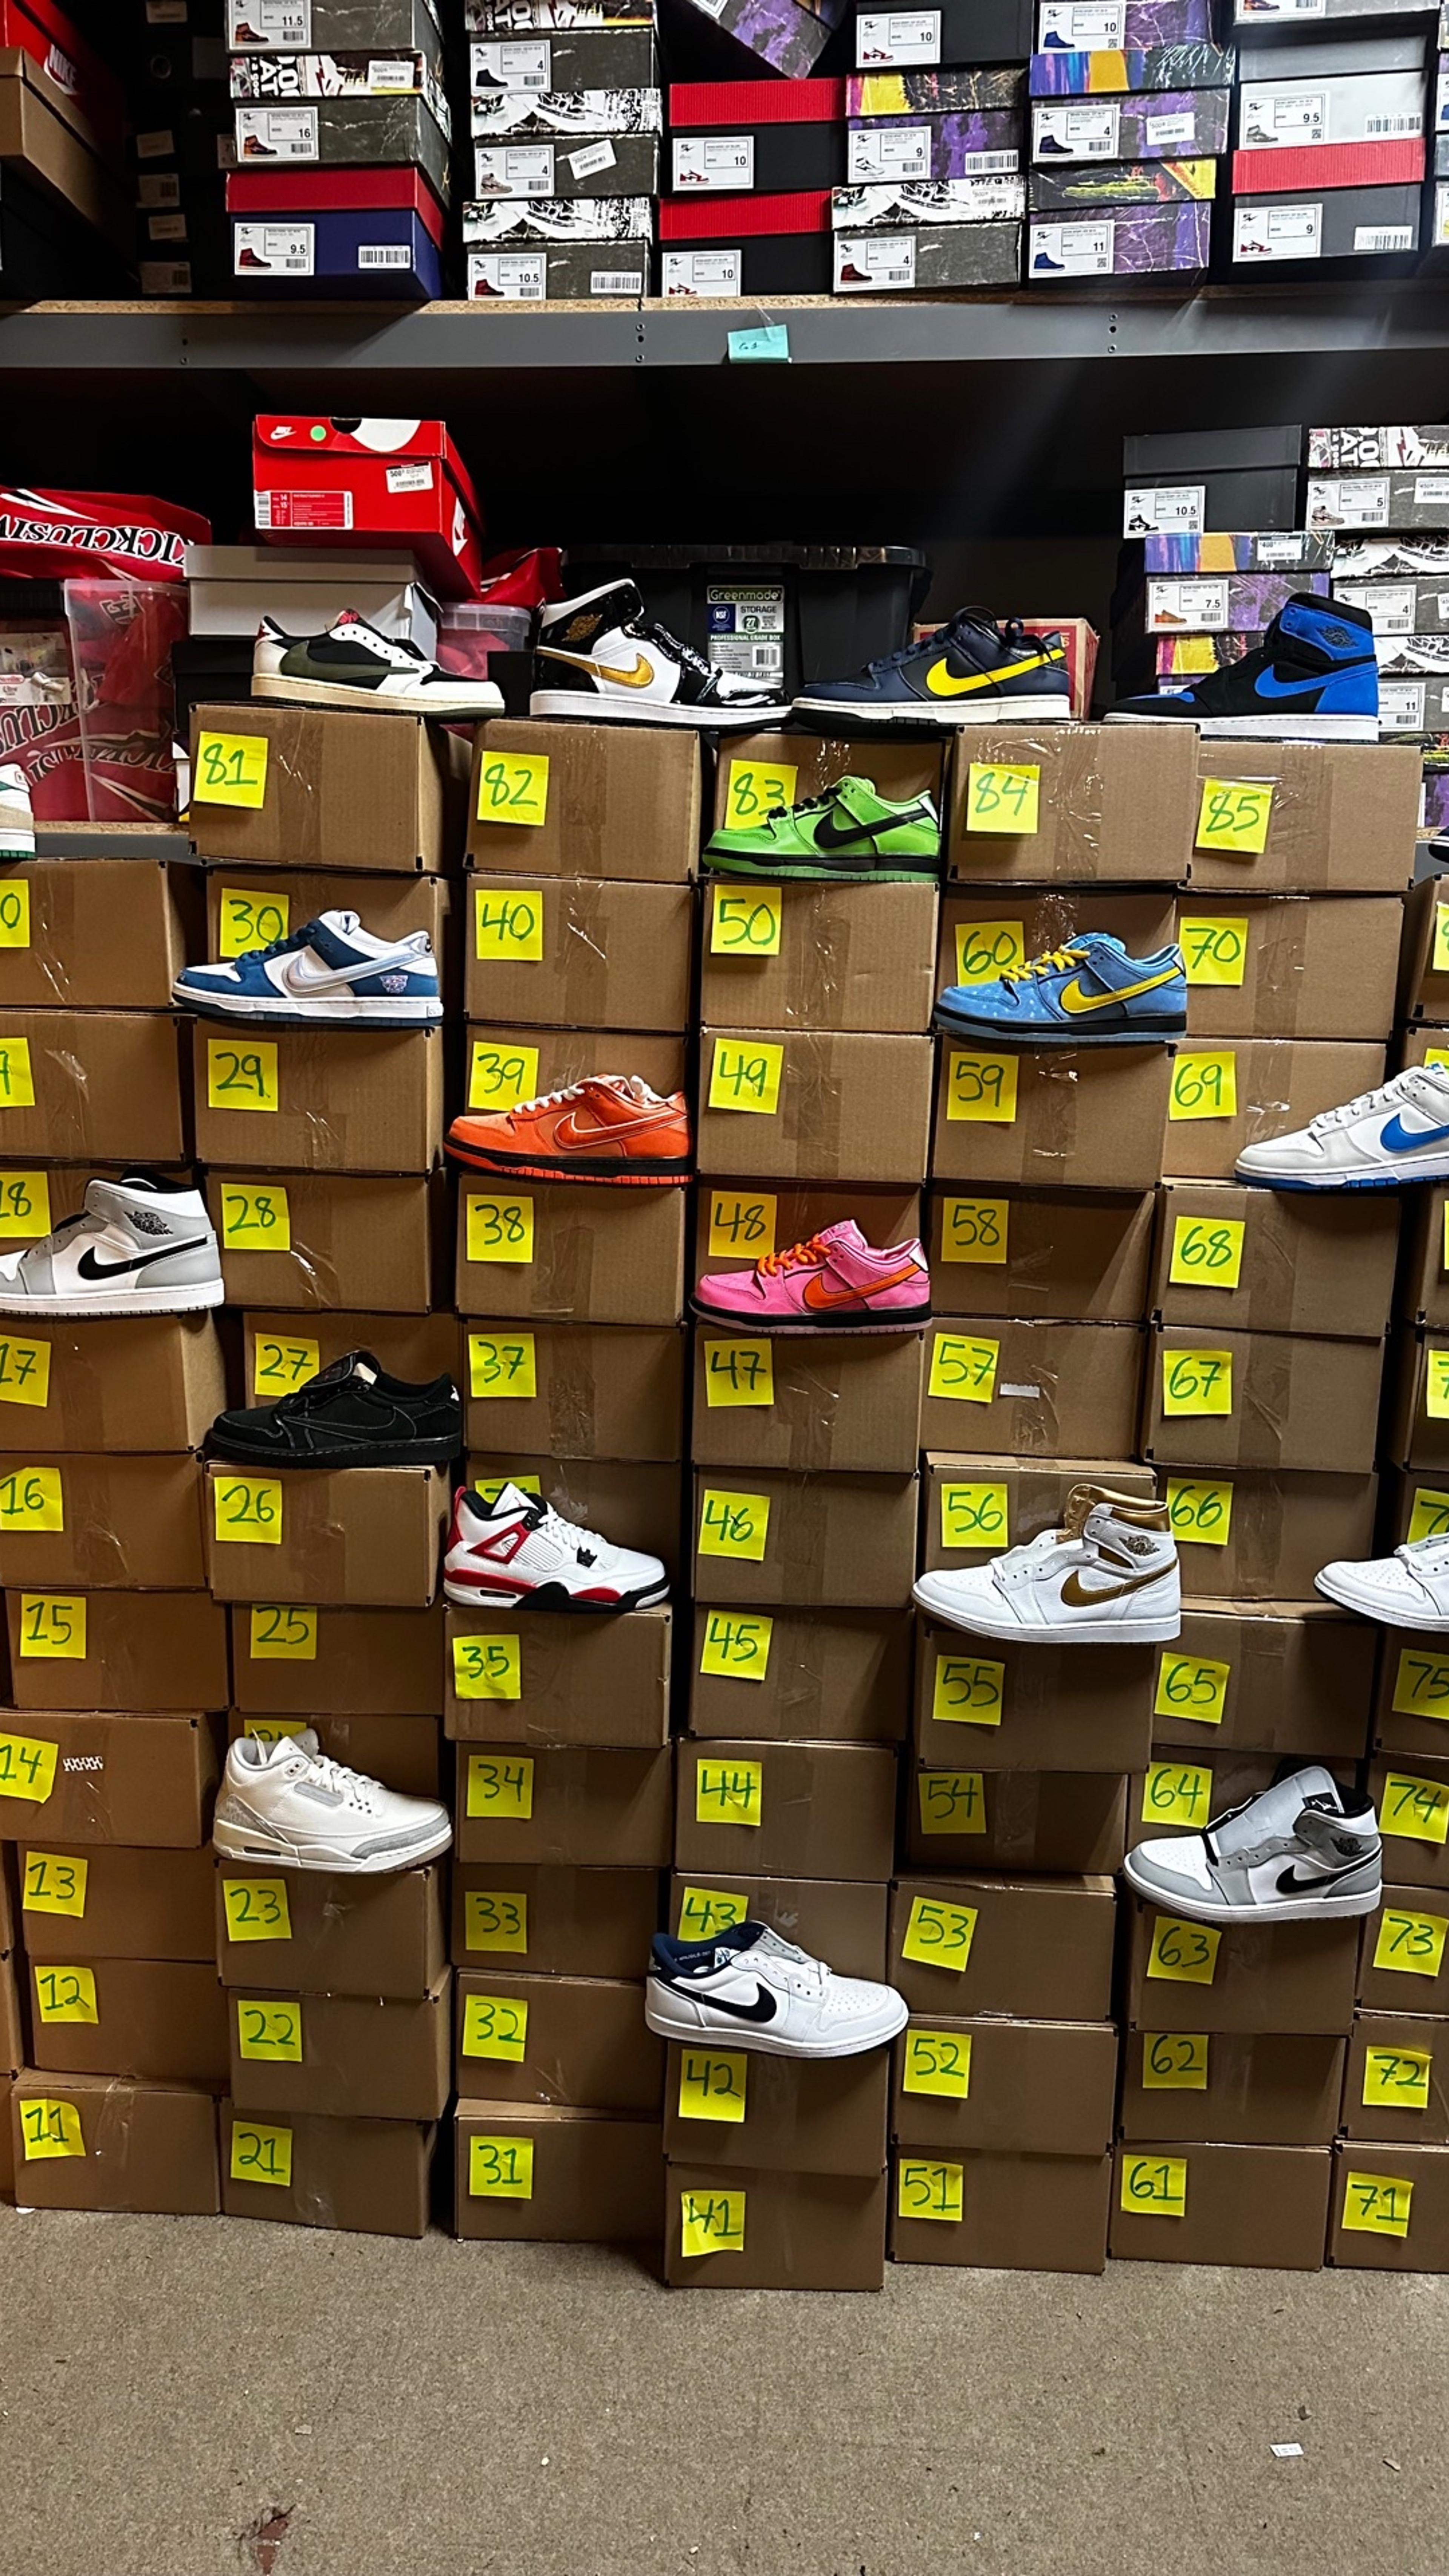 Preview image for the show titled "Every box has sneakers! Over $20,000 in prizes " at Today @ 8:00 PM